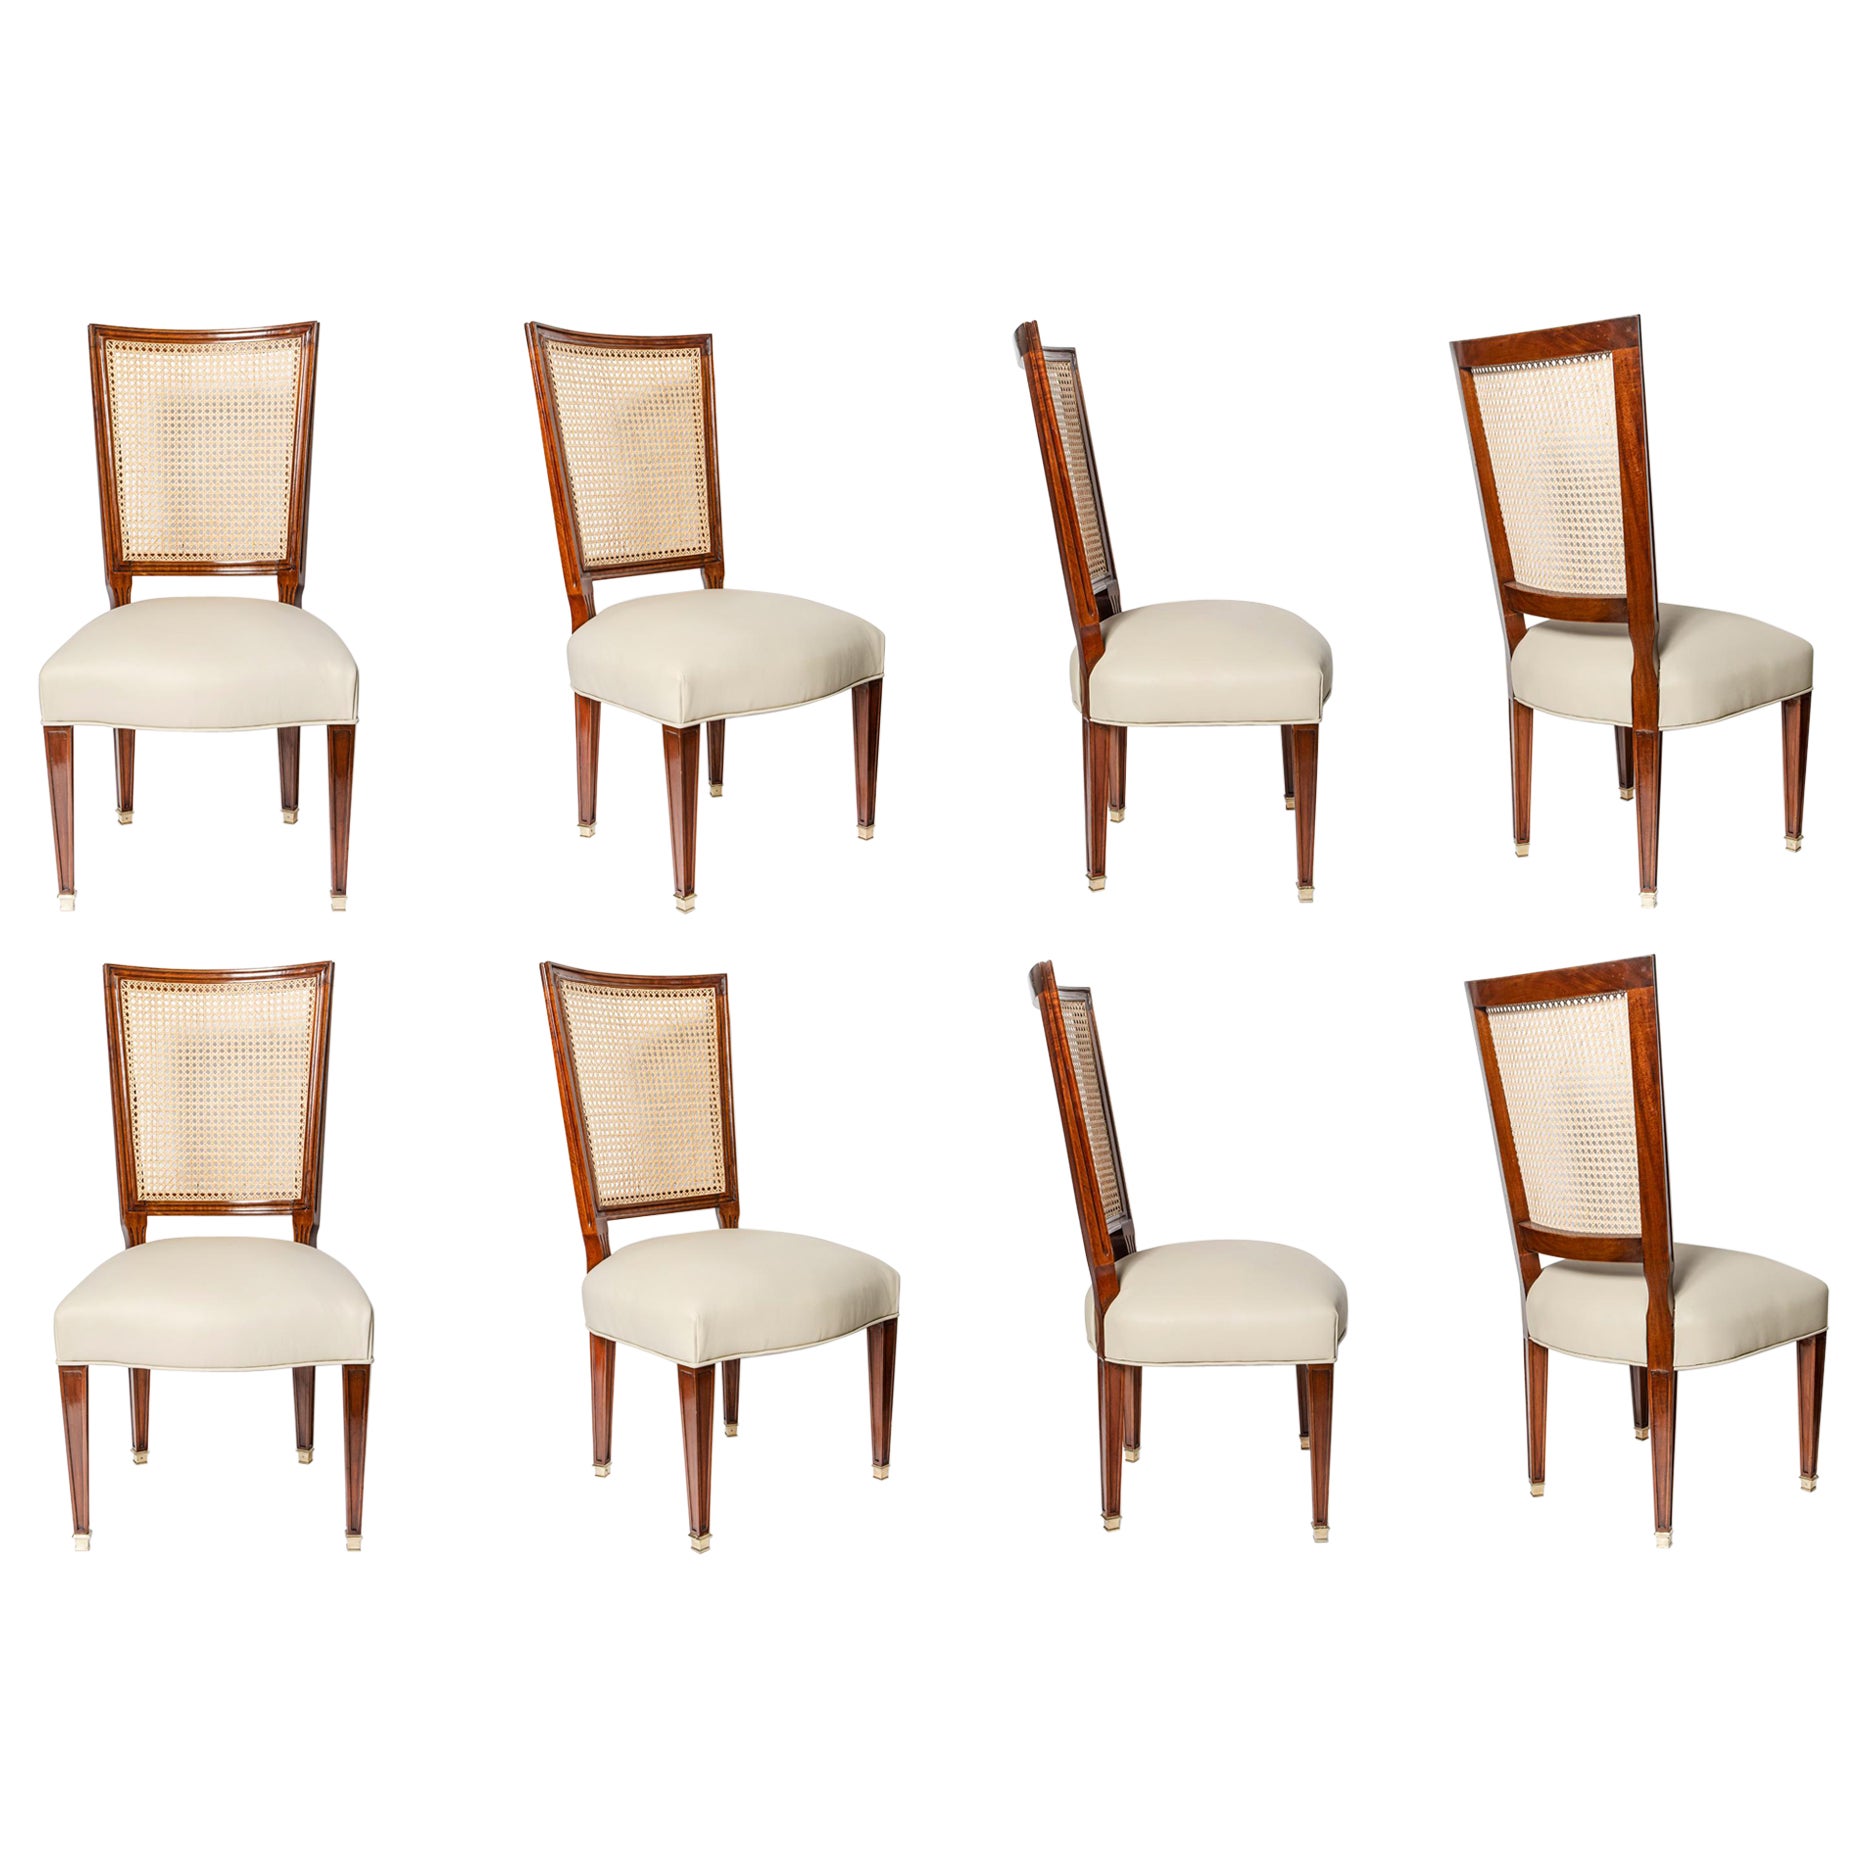 Set of Eight Wood, Rattan and Leather Chairs by Casa Comte, Argentina, 1940 For Sale